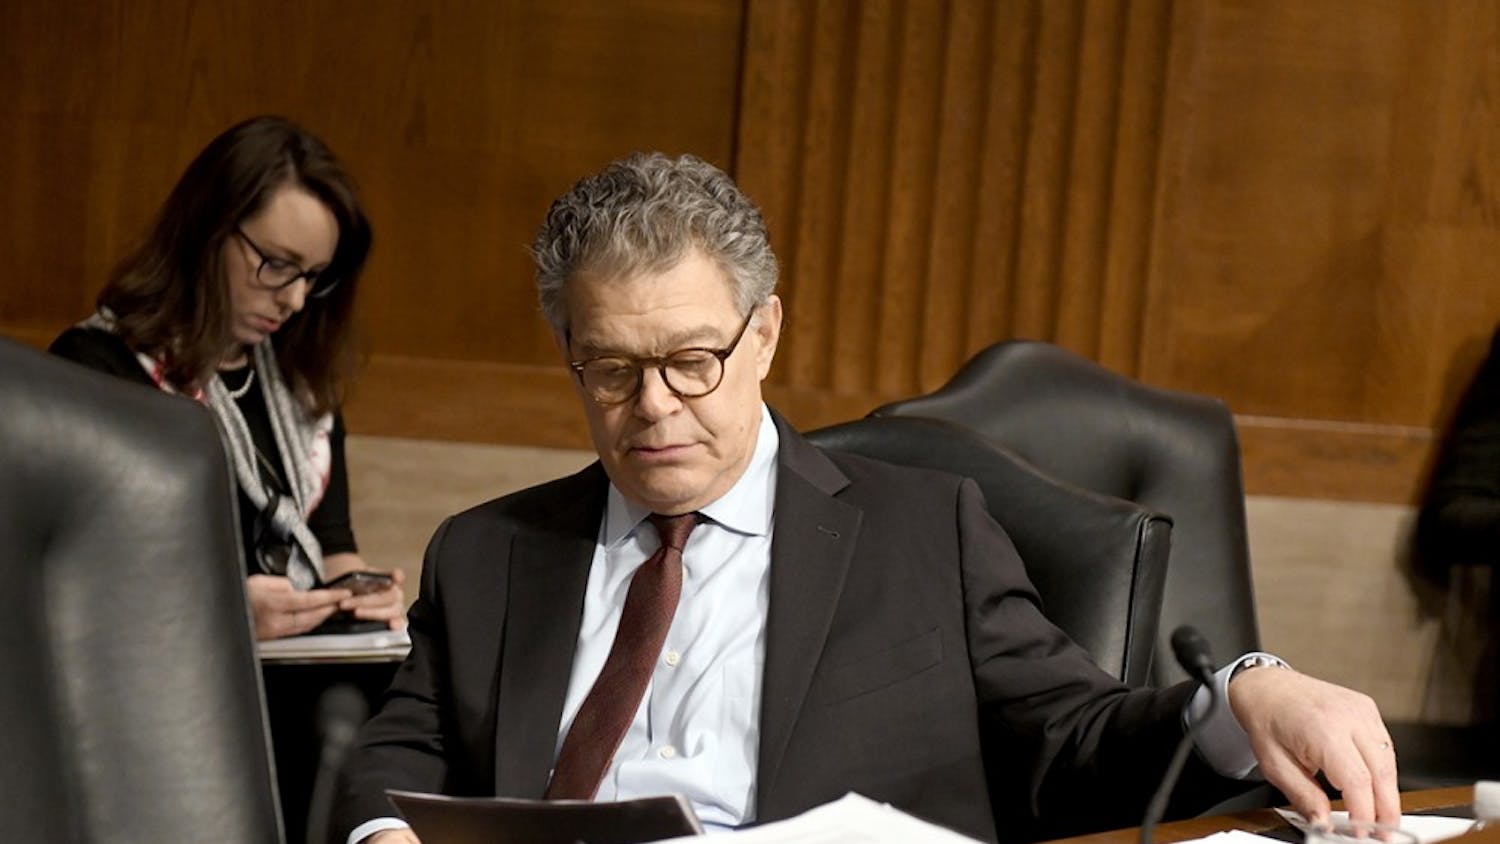 U.S. Sen. Al Franken (D-Minn.) looks over his notes prior to hearing Alex M. Azar II testify before the Senate Committee on Health, Education, Labor and Pensions on his nomination to be Secretary of Health and Human Services on Wednesday, Nov. 29 on Capitol Hill in Washington, D.C. A series of Senate Democratic women issued calls for Franken to resign that morning.